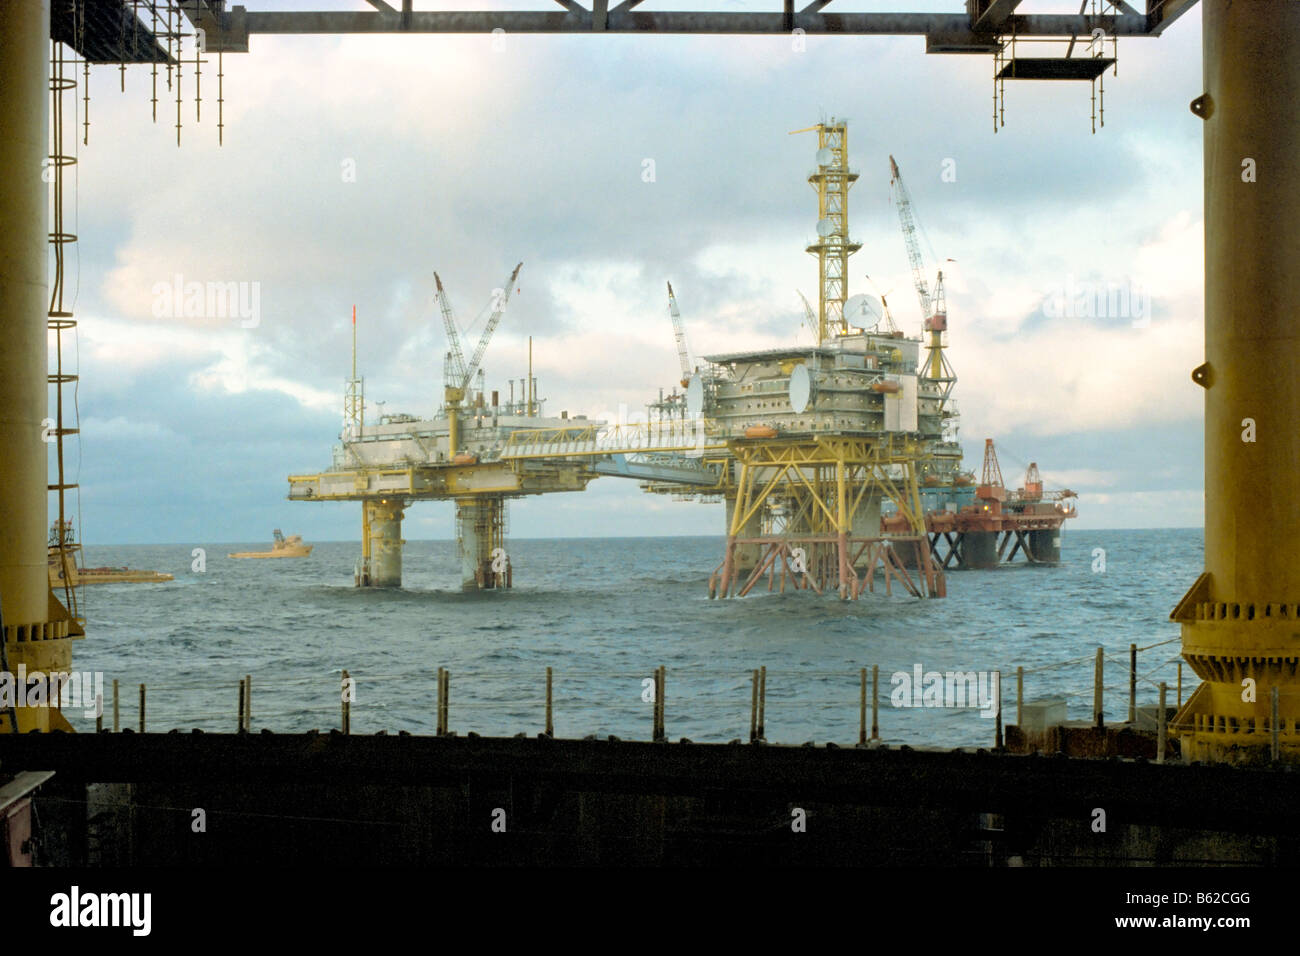 TCP1, TCP2 and DP2 gas production platforms of the Frigg field in the Noregian sector of the North Sea. Stock Photo